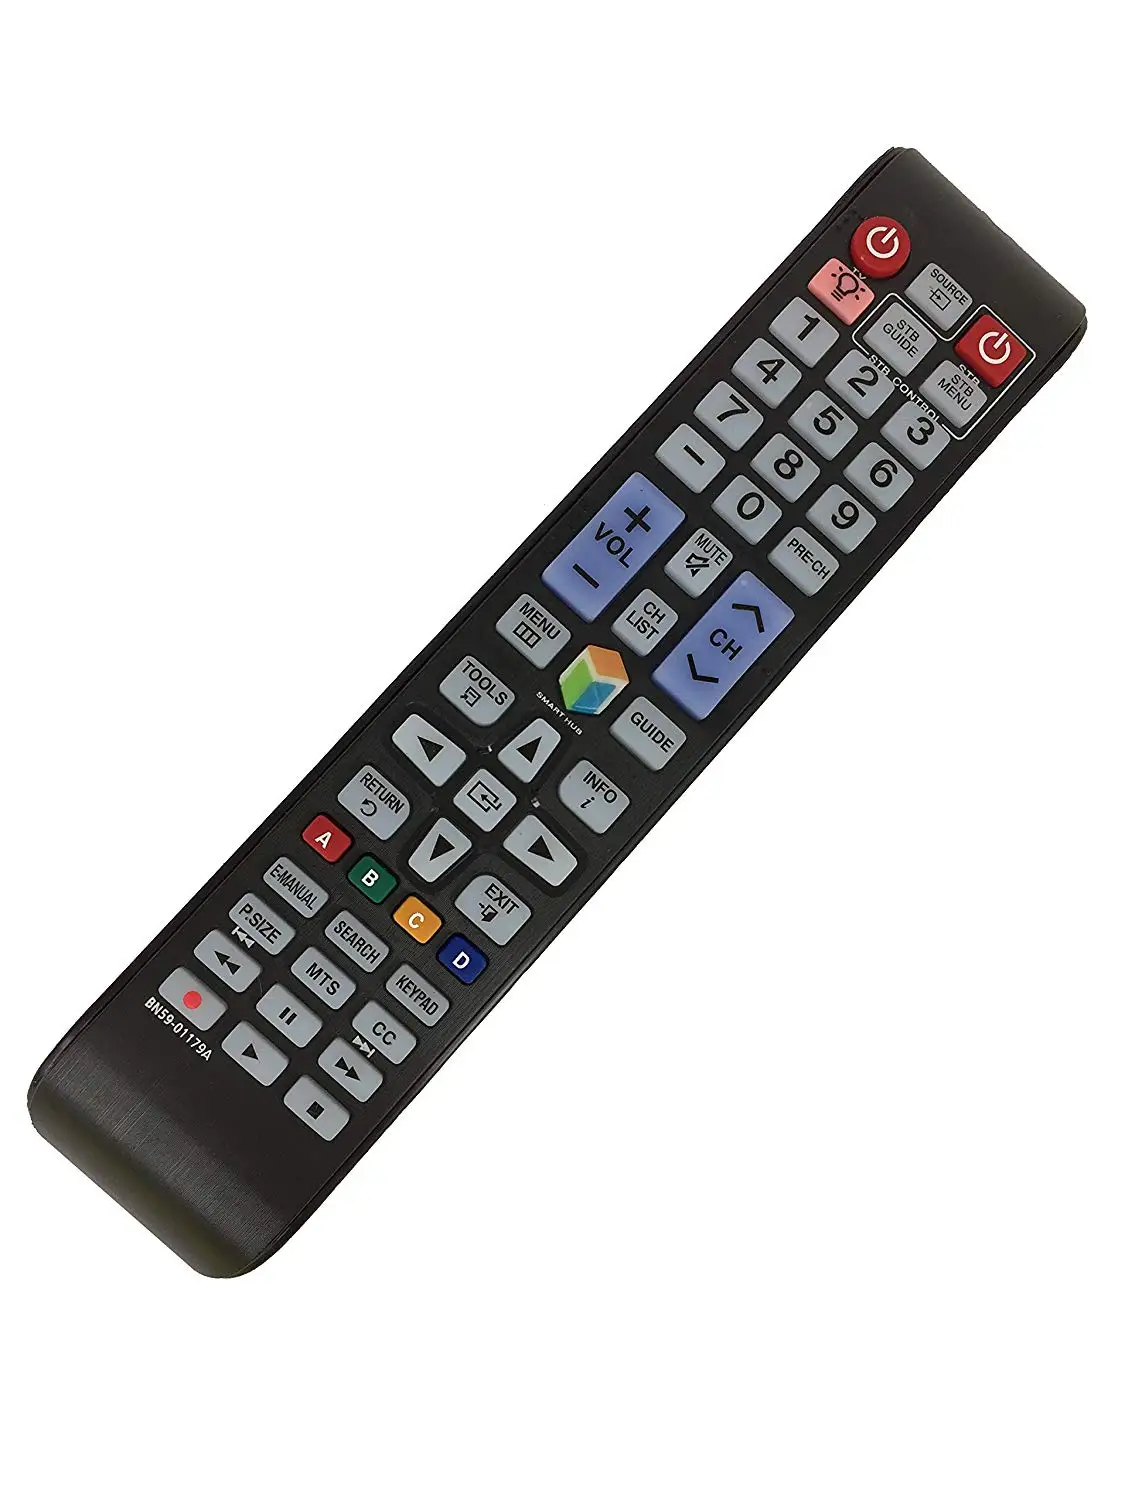 Vervagen Recensie Regeneratief New Bn59-01179a Tv Remote Control Replacement Fit For Samsung Hd Smart  Led/lcd With Backlit - Buy Bn59-01179a Remote Control,Remote Control Fit  For Samsung Smart Hd,Backlit Remote Control Product on Alibaba.com